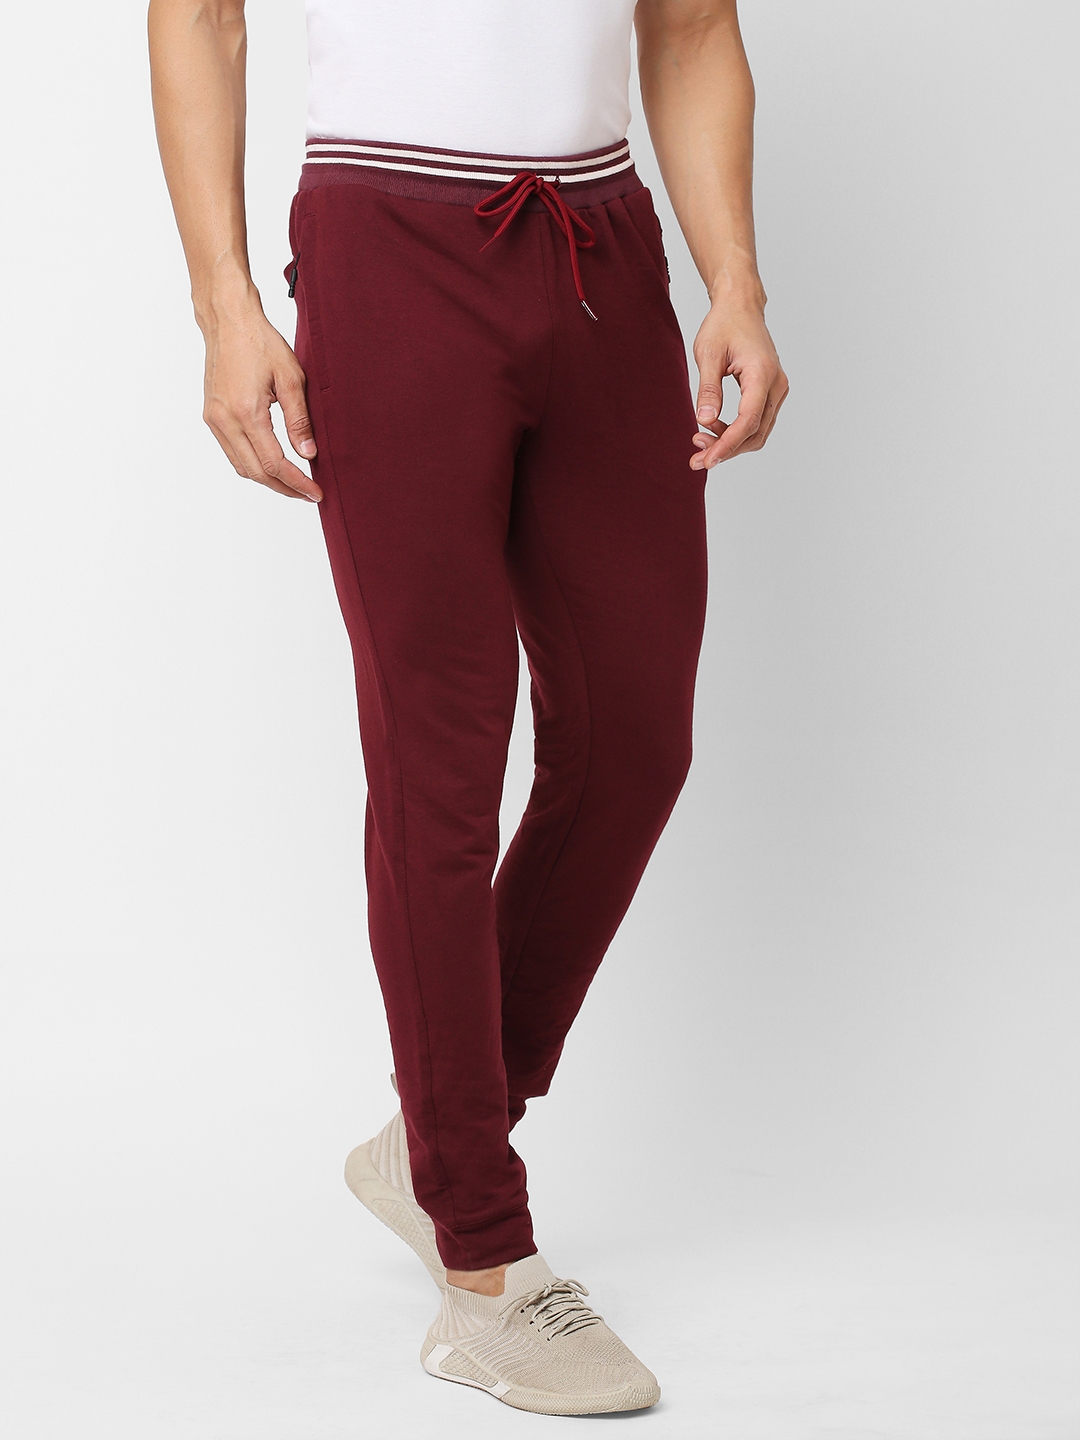 Men's Slim Fit Red Cotton Blend Casual Joogers